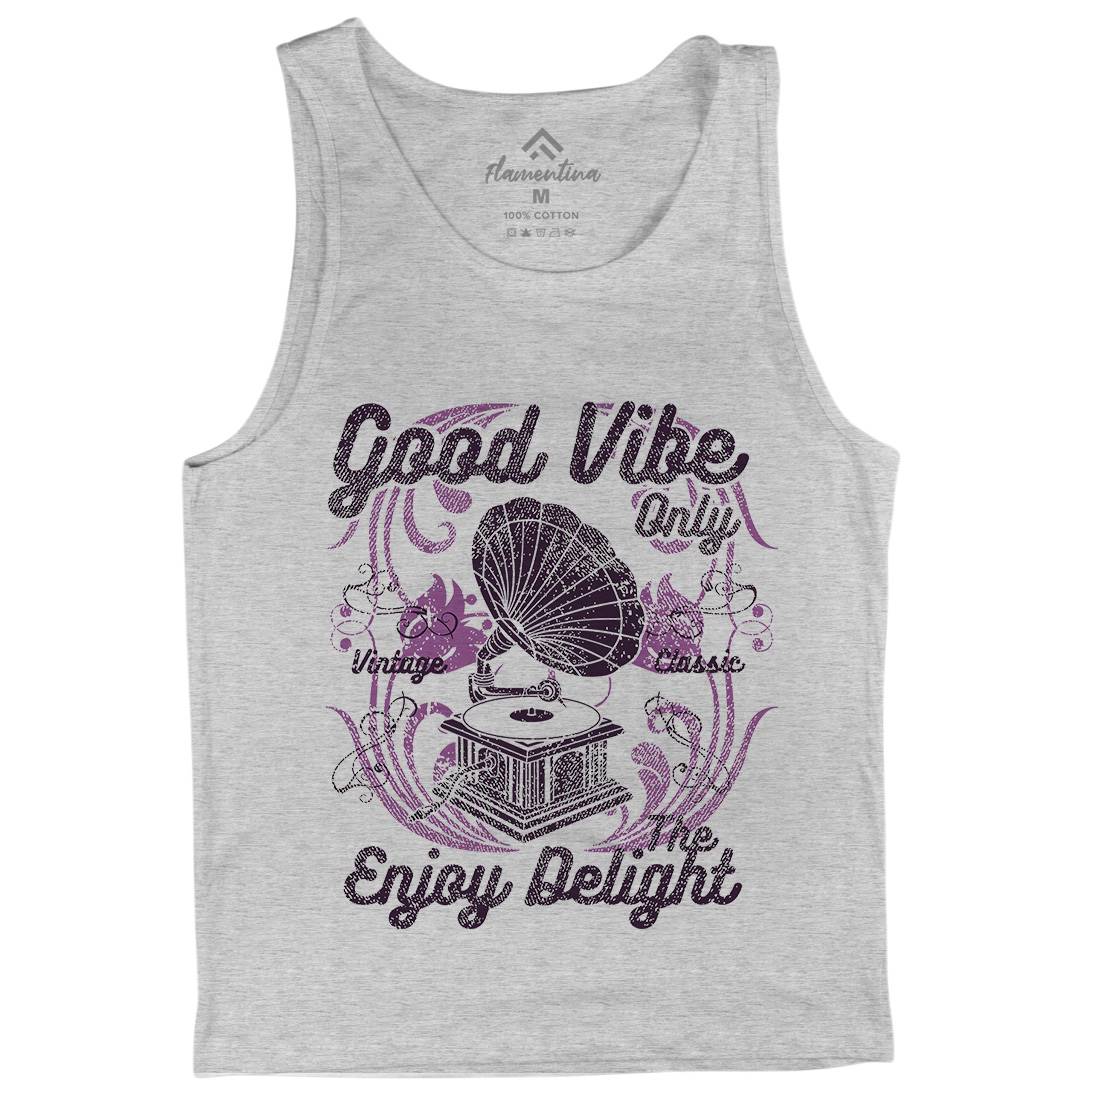 Good Vibe Only Mens Tank Top Vest Music A059